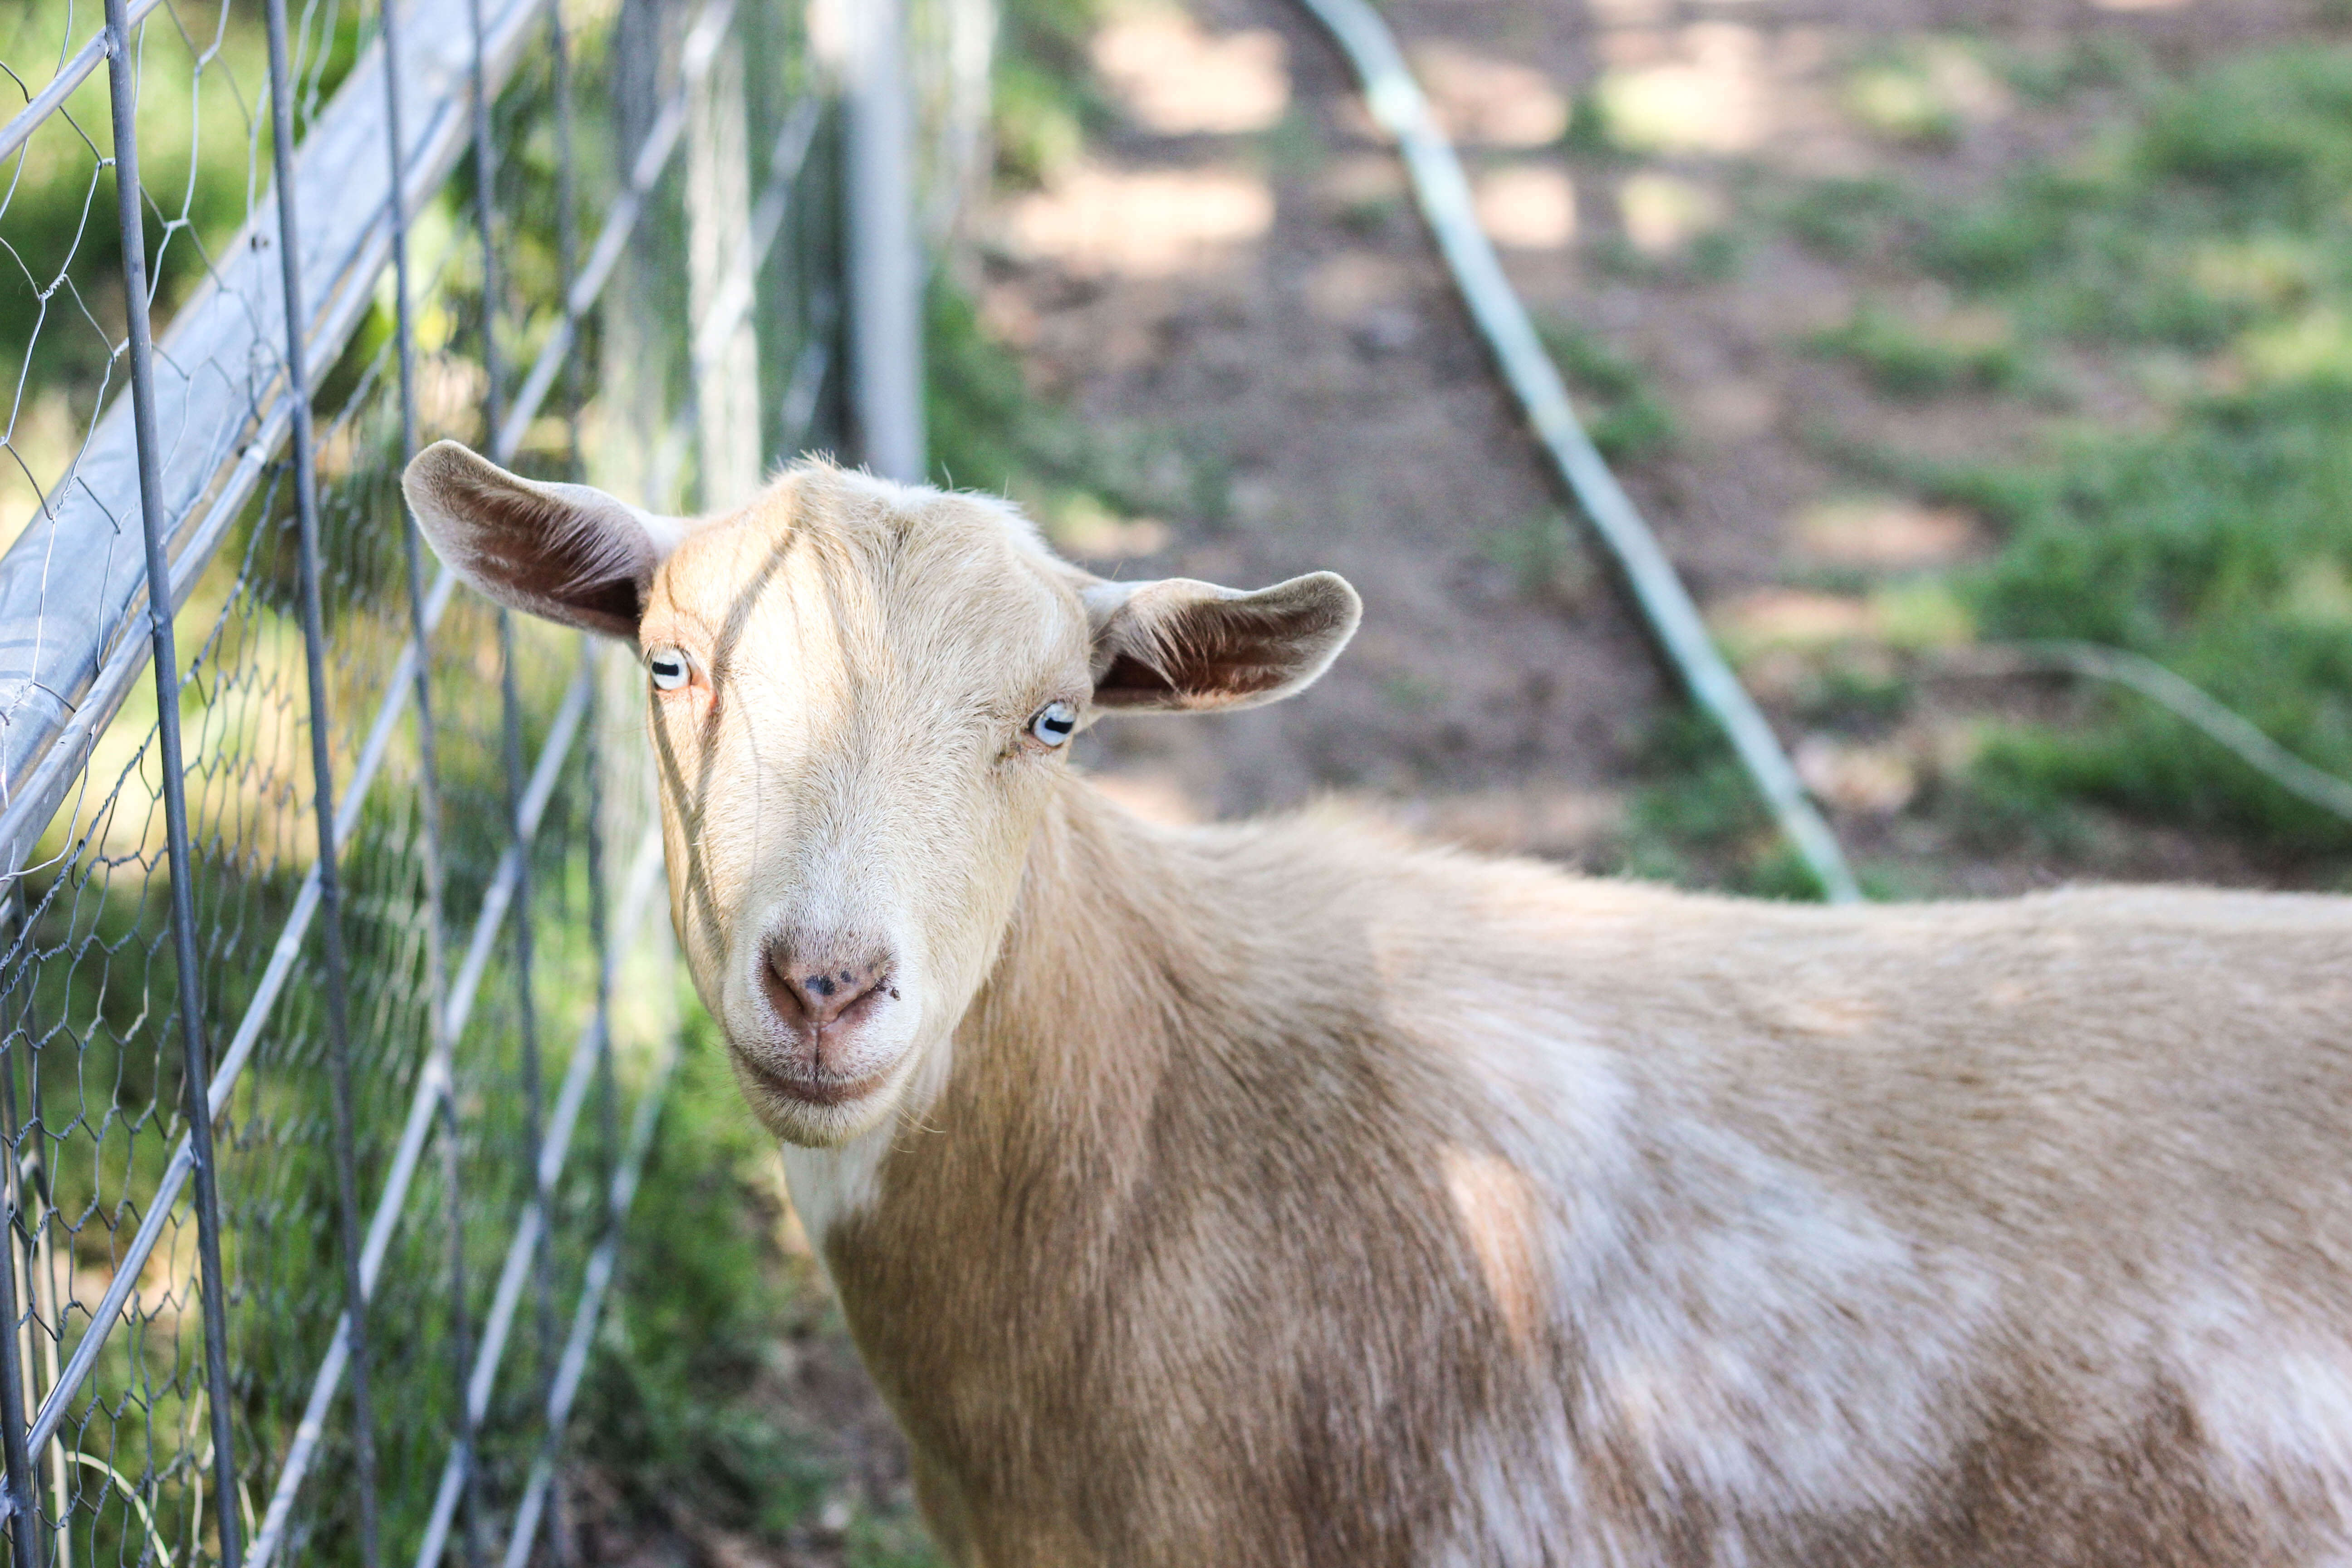 Goat Vaccinations - What you need to know - Weed 'em & Reap